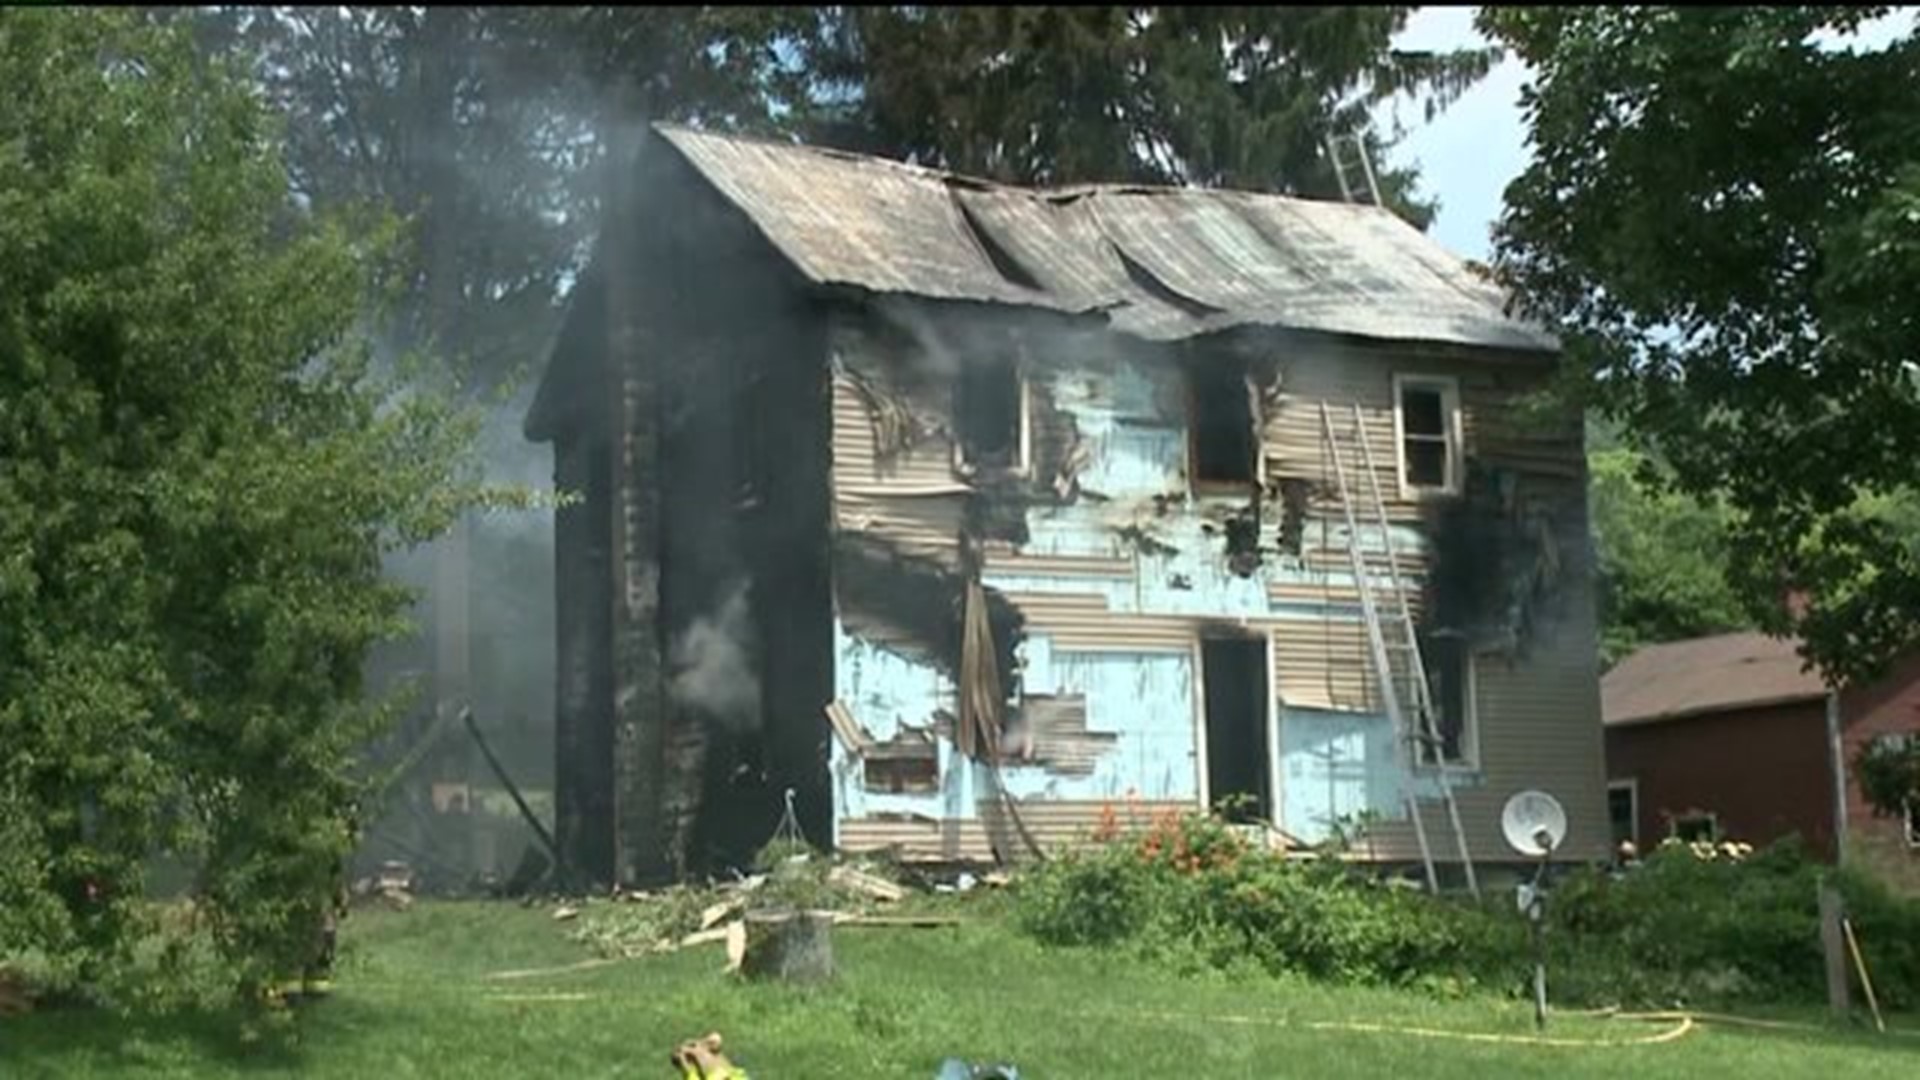 Man Injured, Home Destroyed in Fire